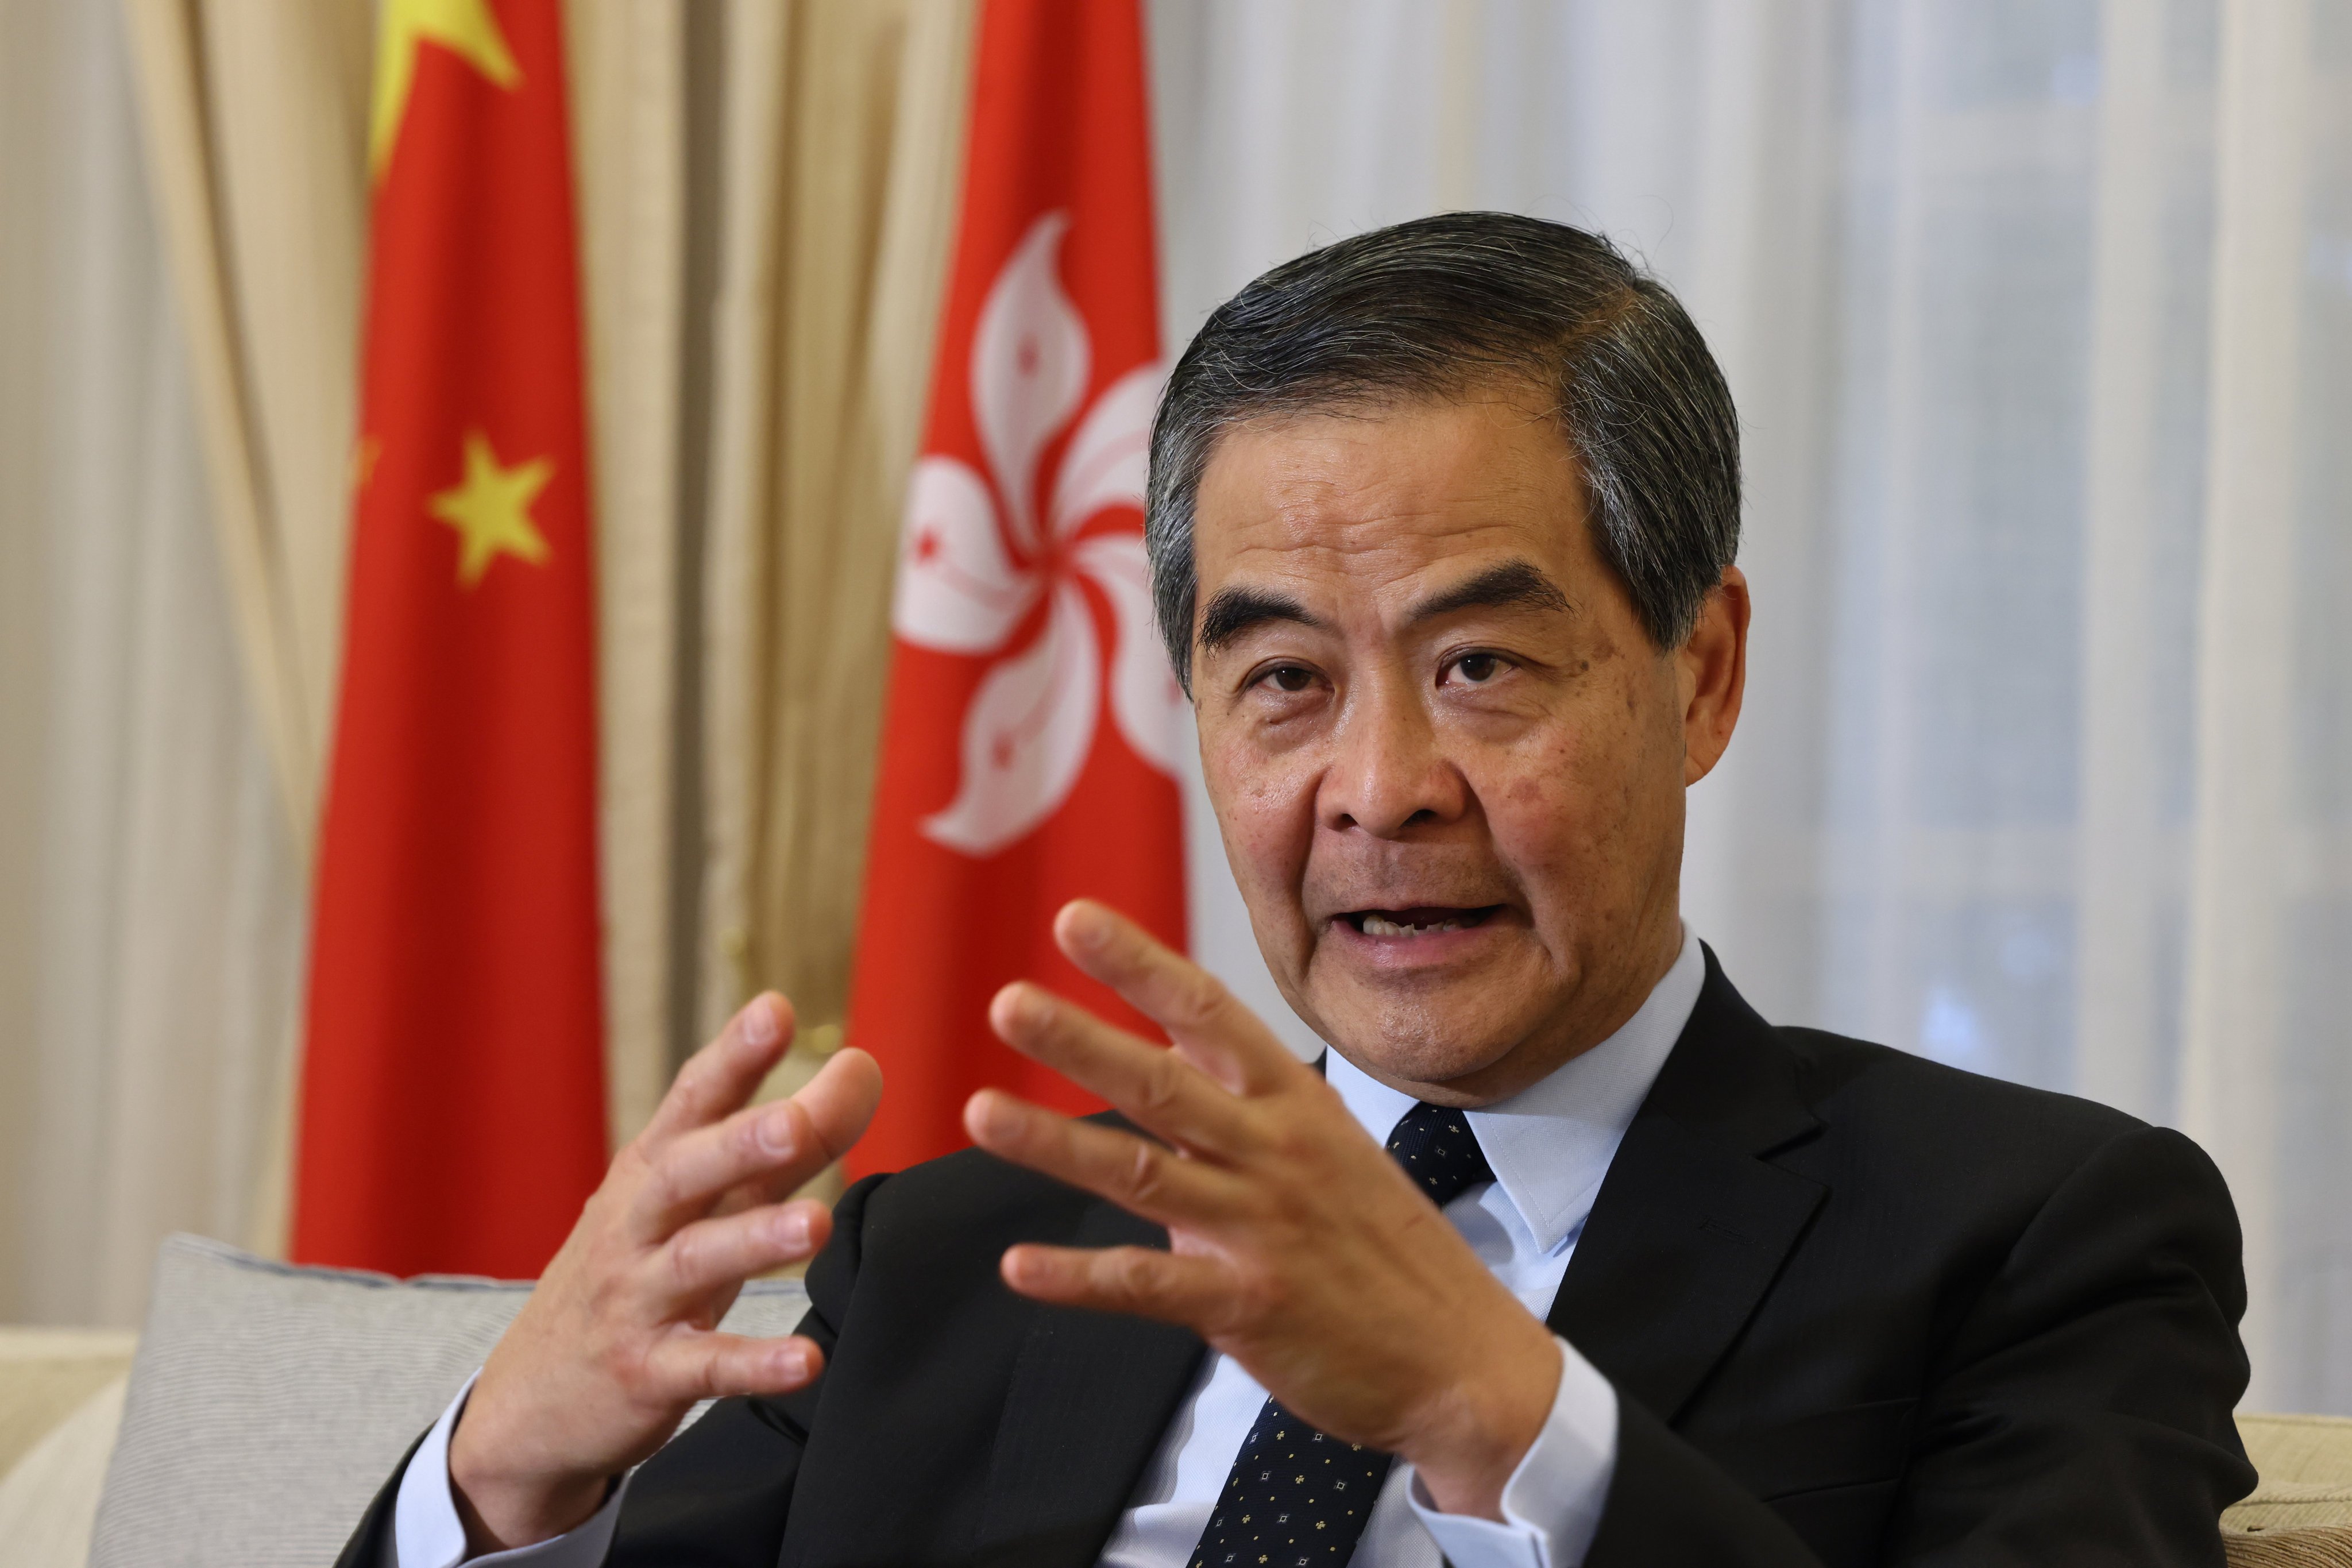 Former Hong Kong leader Leung Chun-ying says some sunset sectors should also be let go. Photo: Dickson Lee